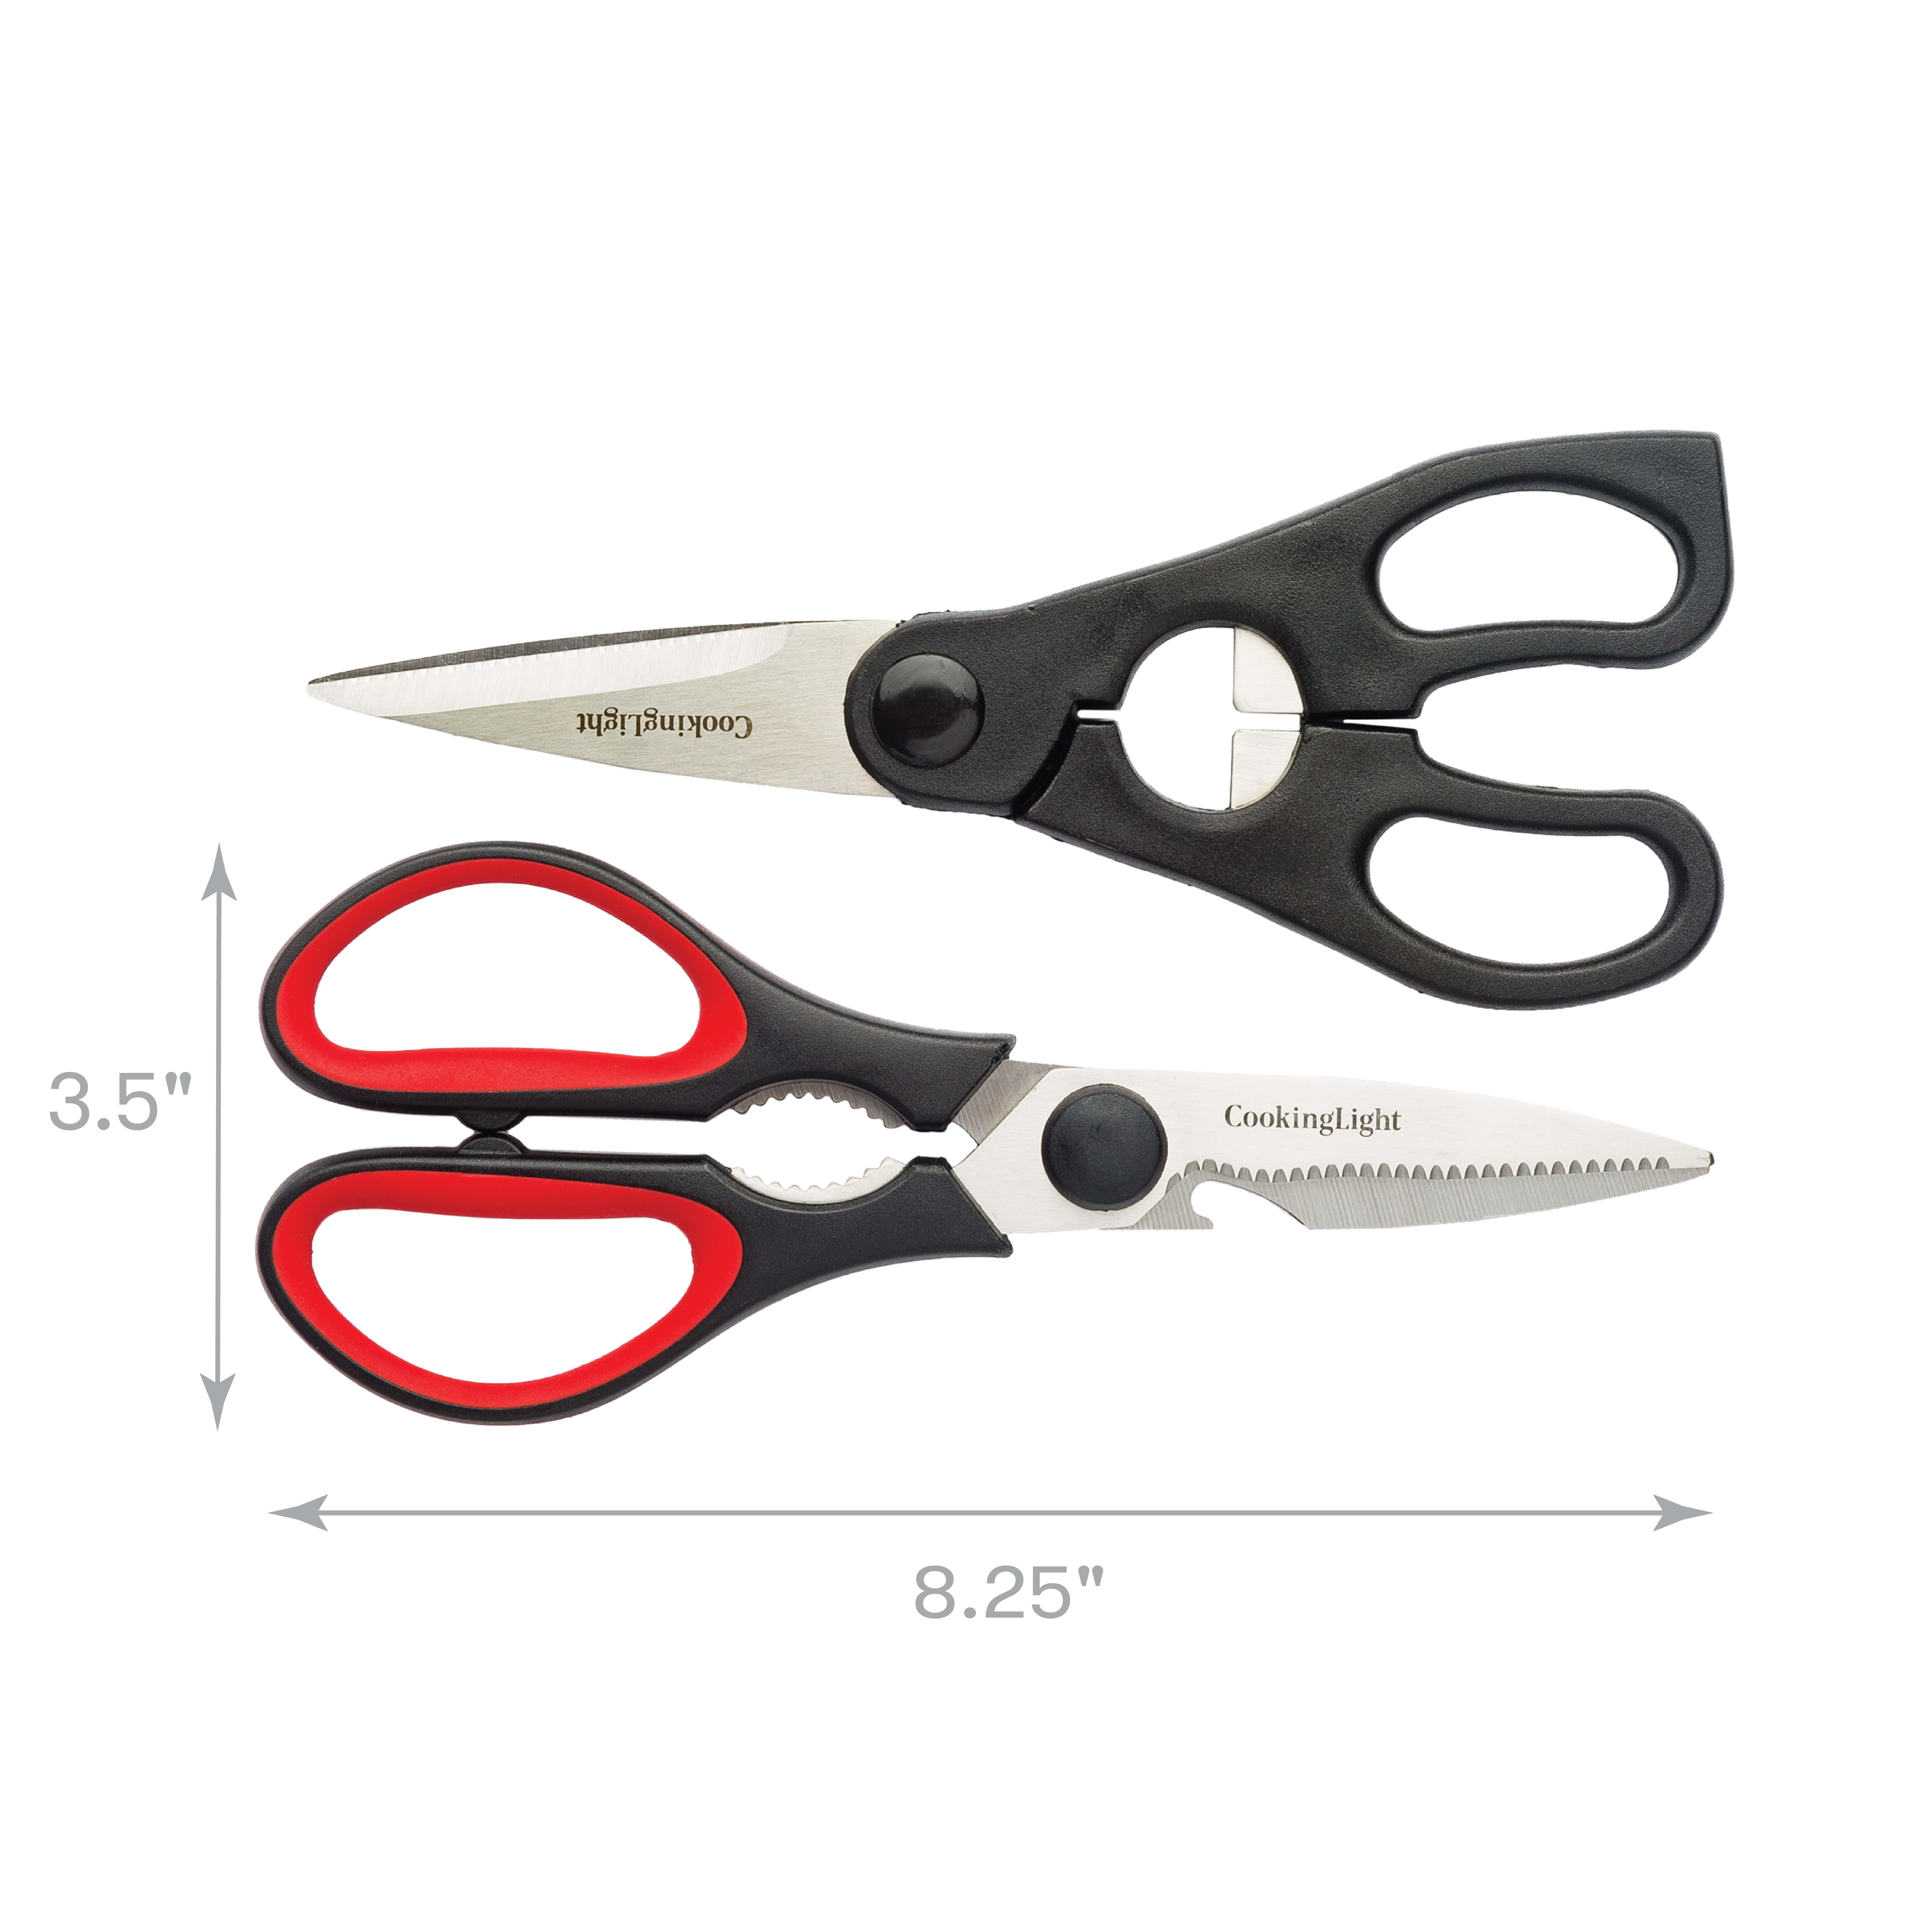 Cooking Light Heavy Duty Stainless Steel for Cutting Poultry, Fish, Meat and Herbs, Built-in Bottle Black and Red Kitchen Tools, 2 Piece Shears Set